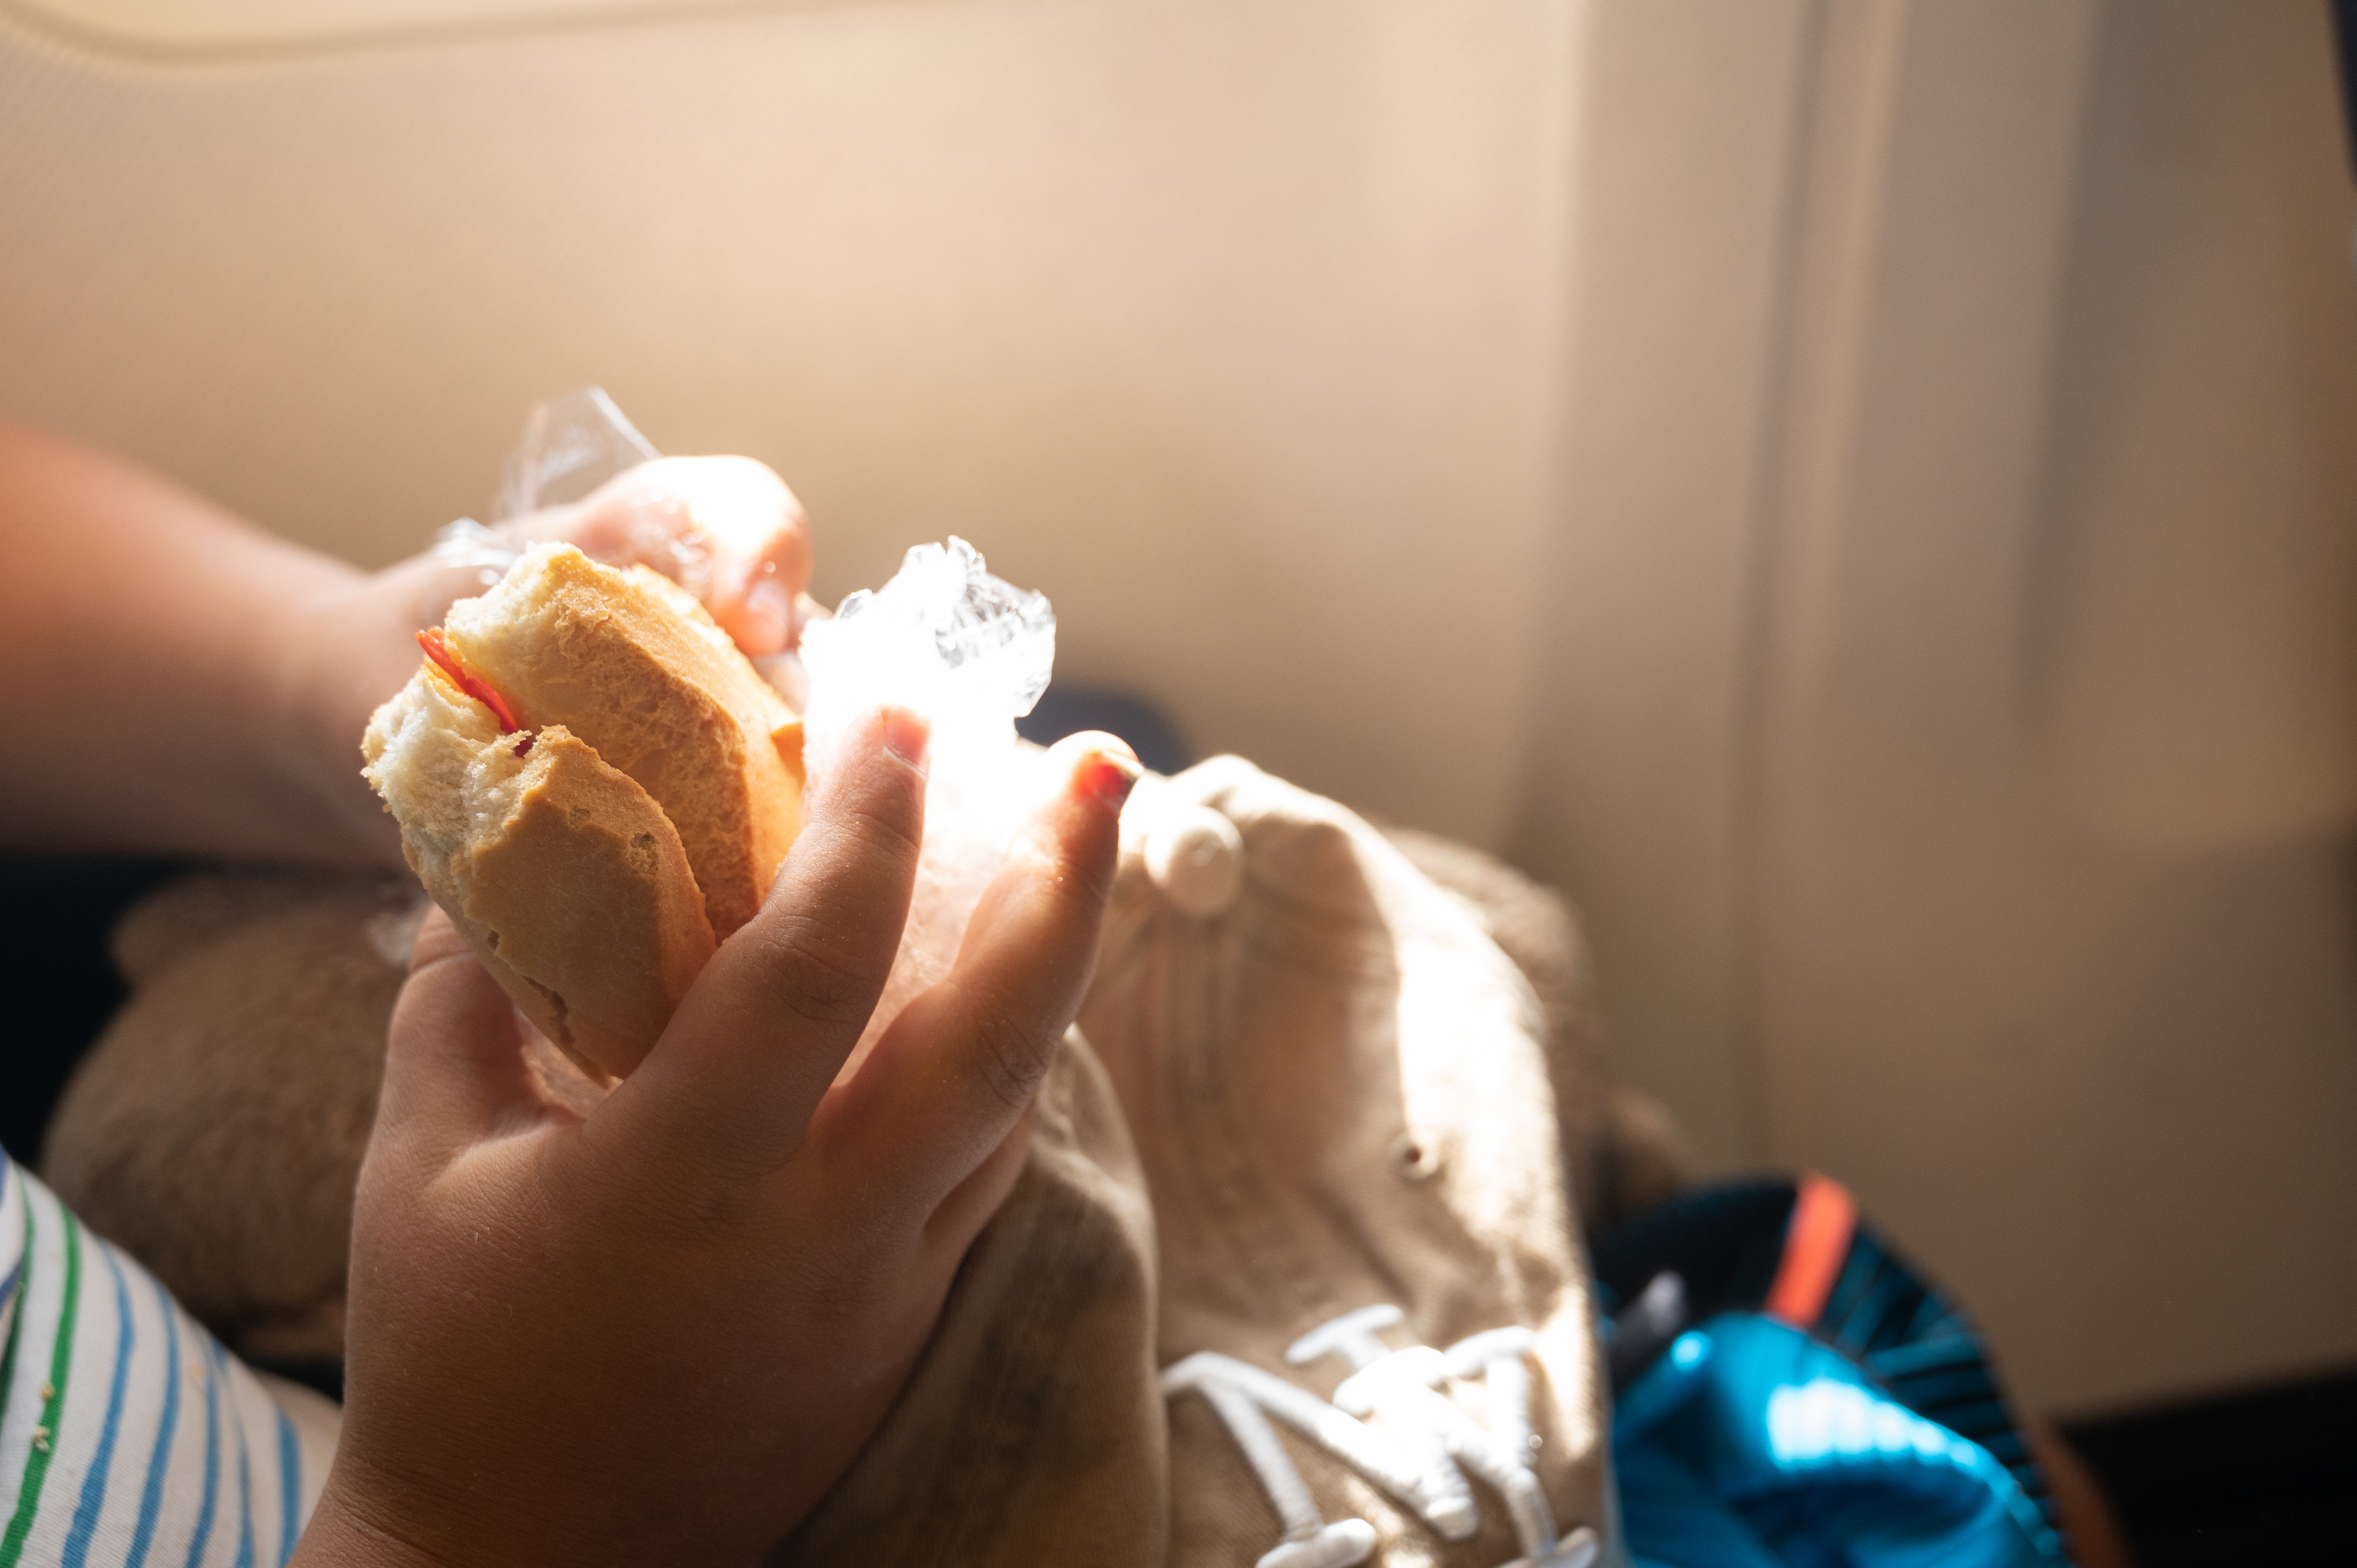 Child eating a sandwich